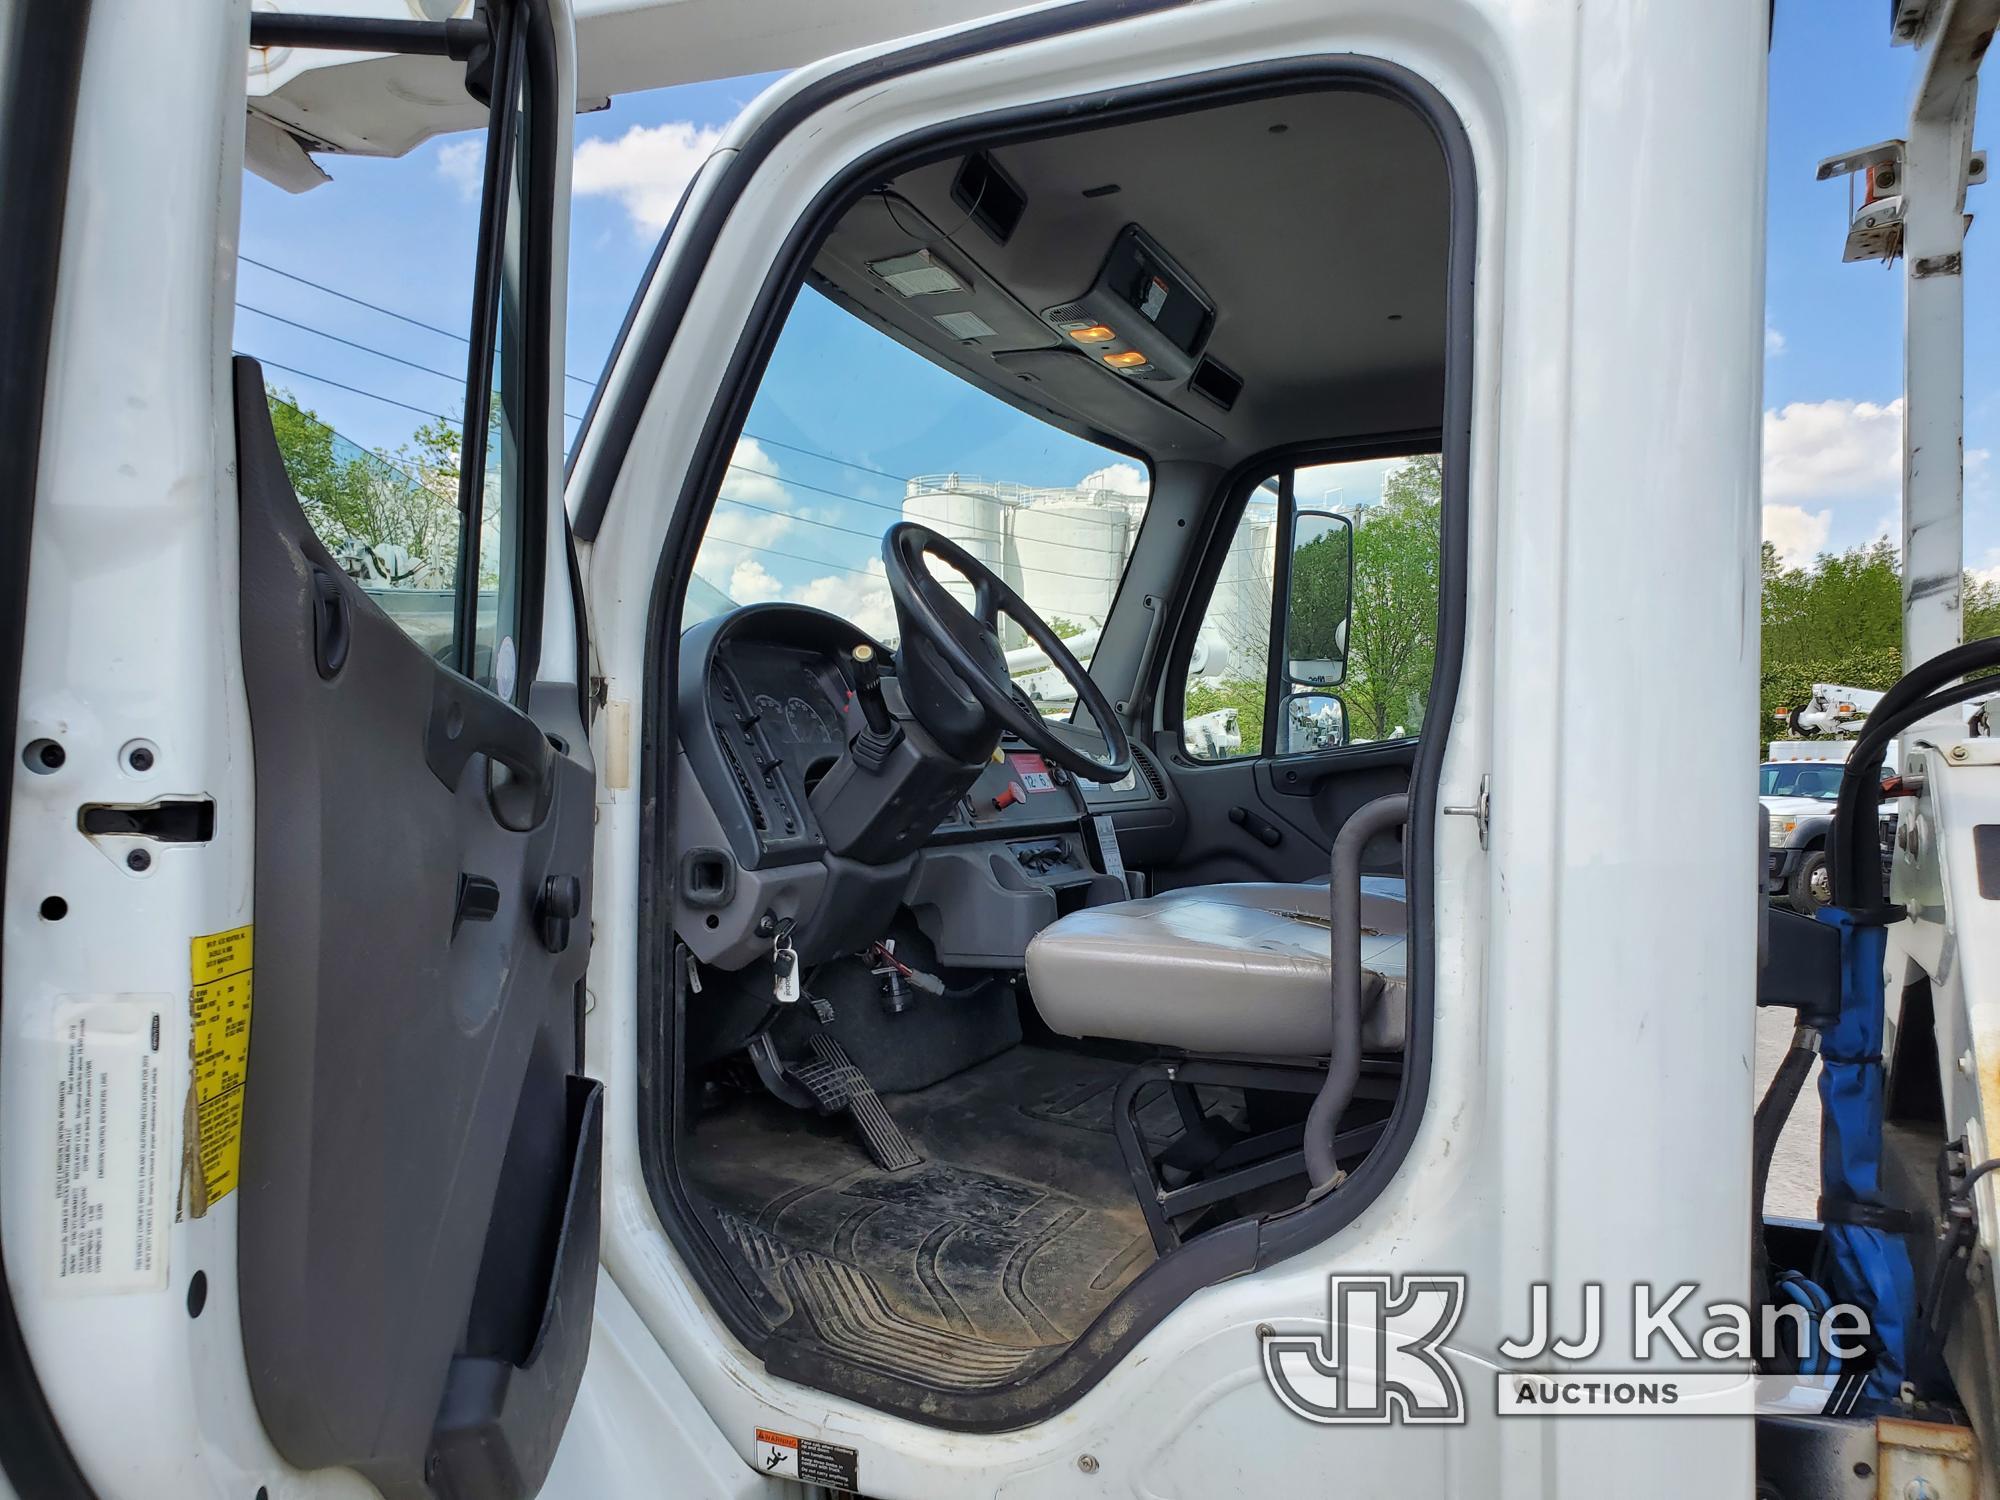 (Indianapolis, IN) Altec AA55, Material Handling Bucket Truck rear mounted on 2019 Freightliner M2 U